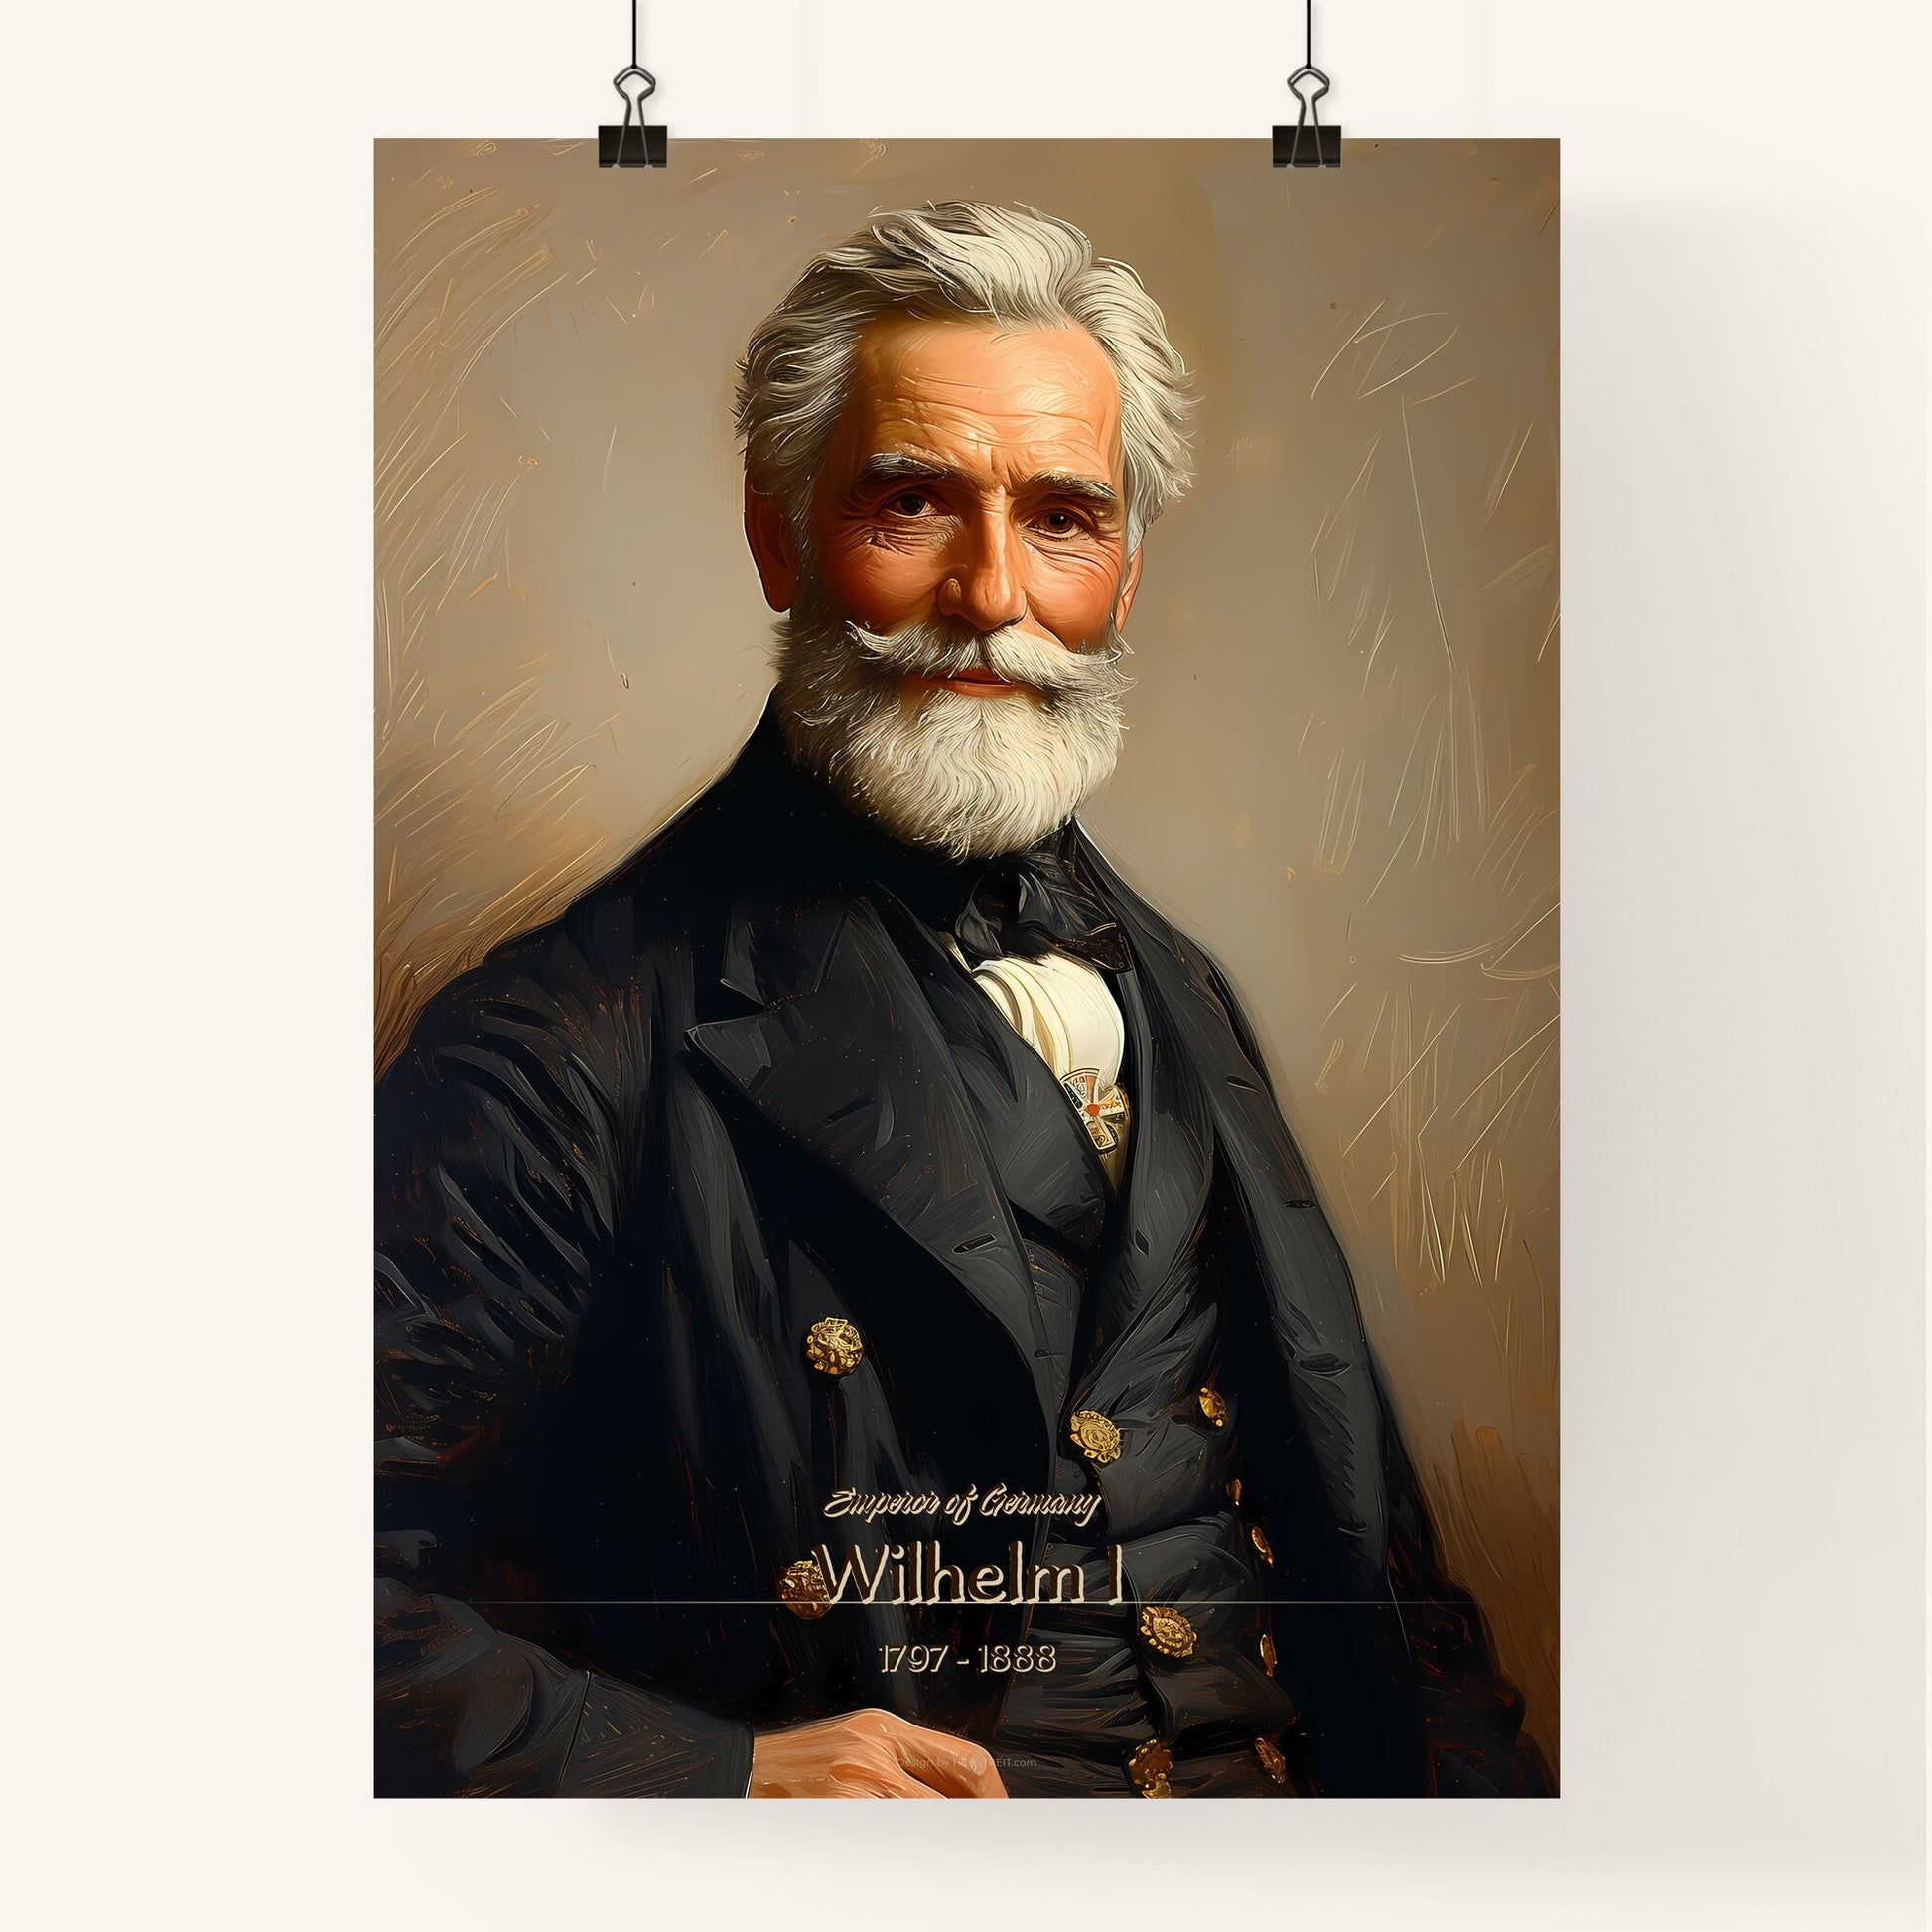 Emperor of Germany, Wilhelm I, 1797 - 1888, A Poster of a man with a white beard and mustache Default Title